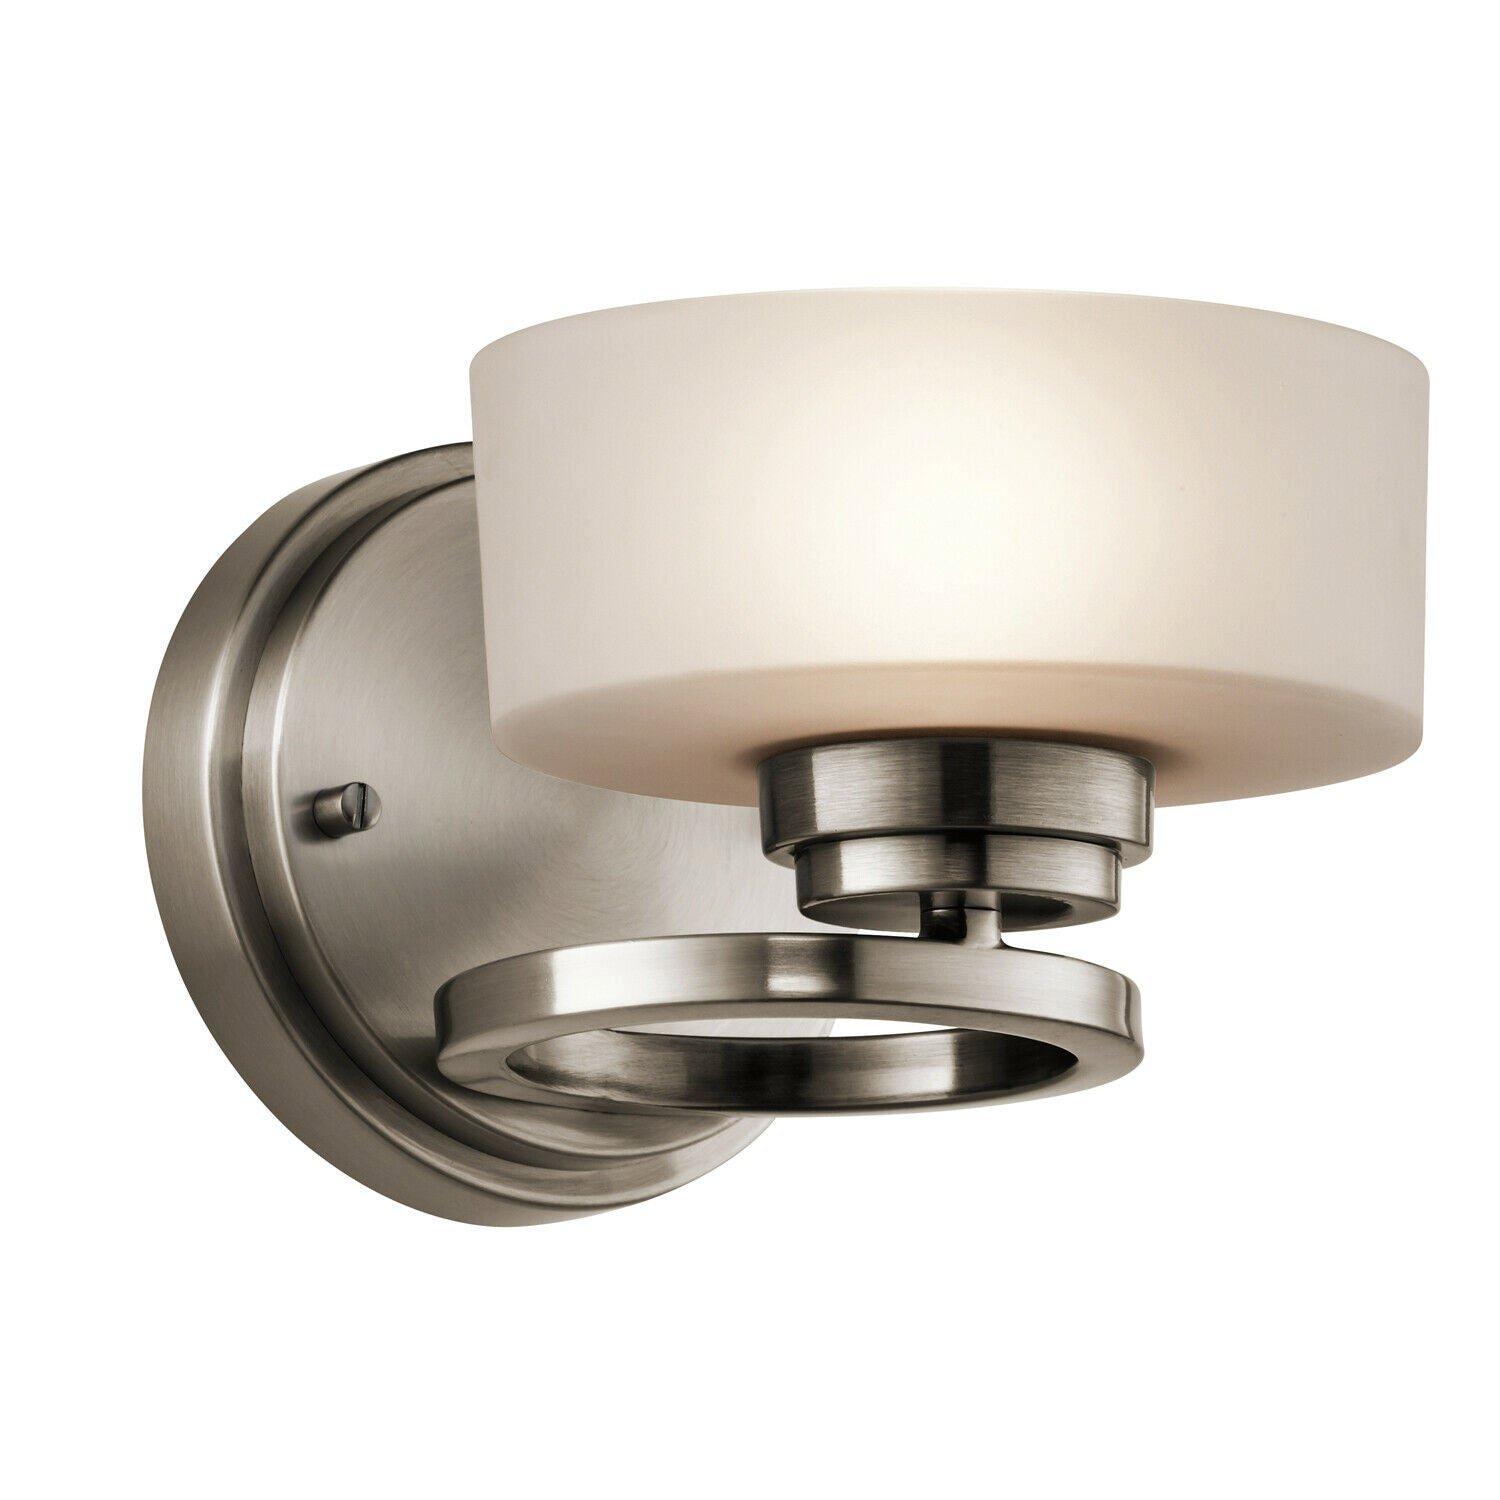 Wall Light Aluminium Concentric Rings Oval Globe Shade Classic Pewter LED G9 40W